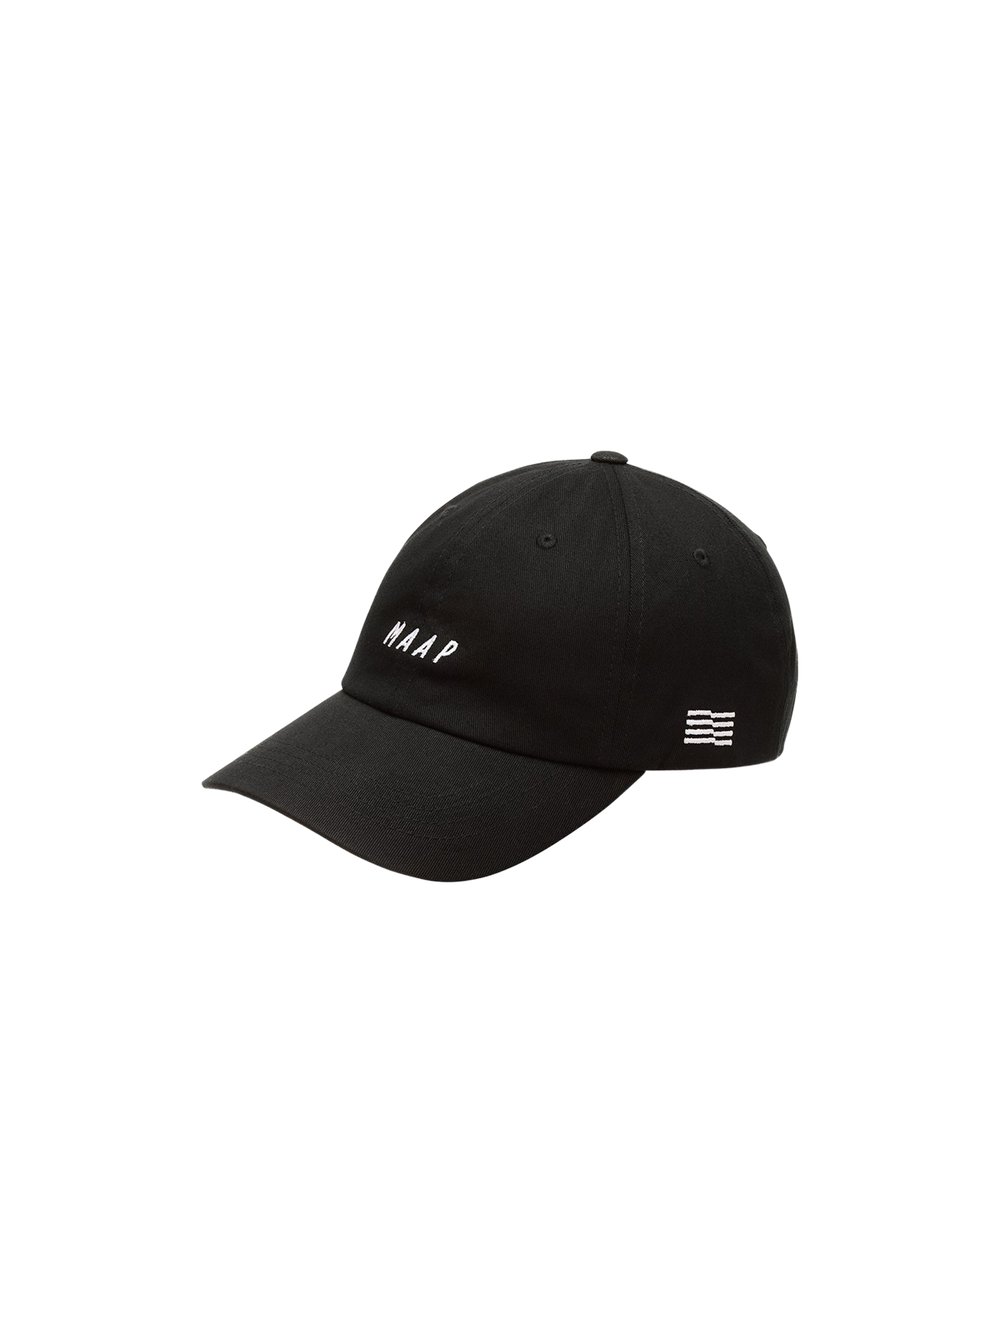 Product Image for MAAP Dad Cap